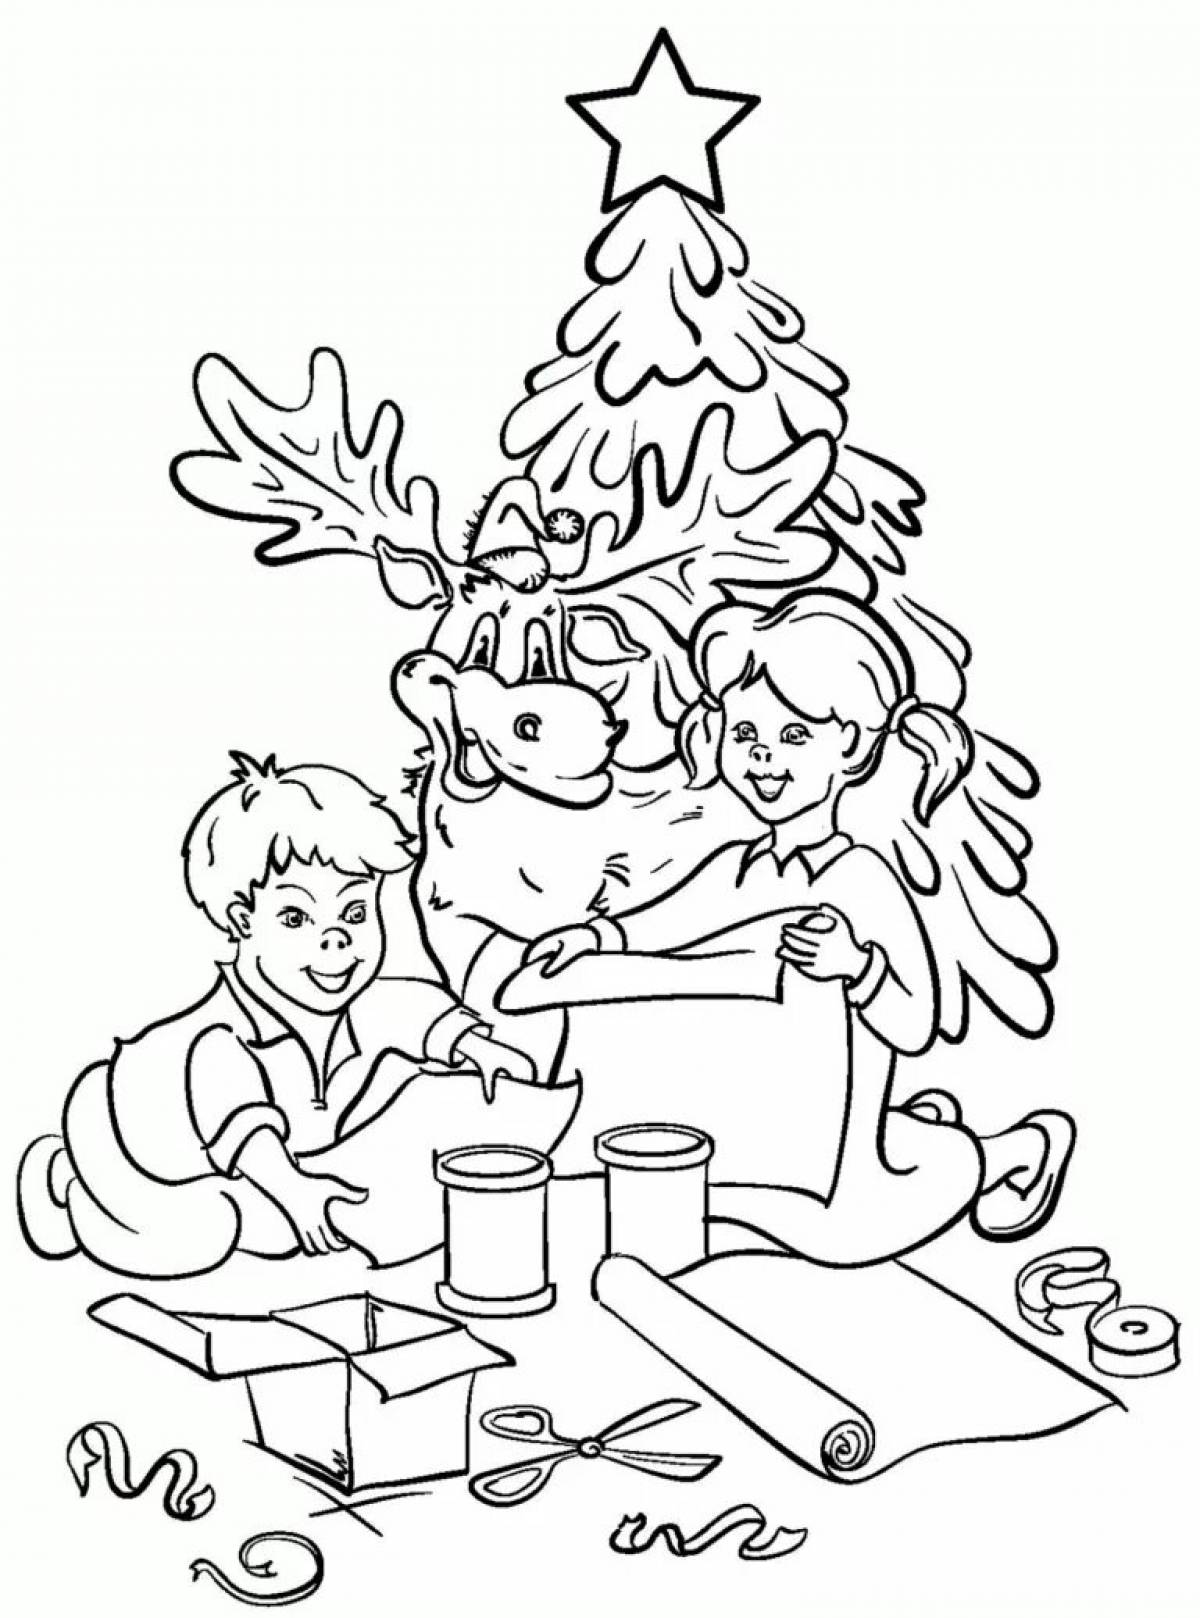 Glitter Christmas family coloring book